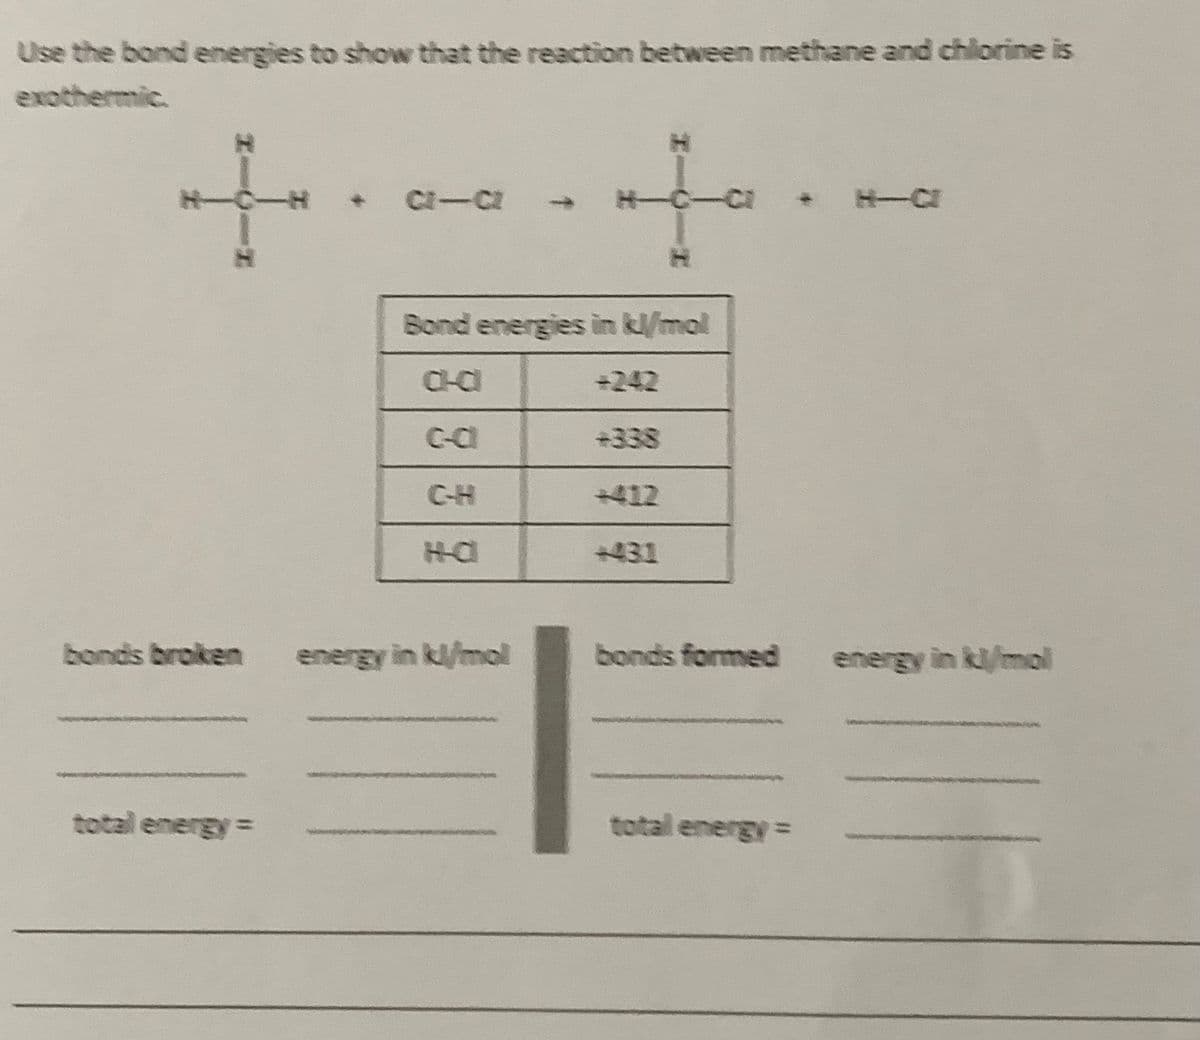 Use the bond energies to show that the reaction between methane and chlorine is
exothermic.
to
C-CI
H-
H-CI
1.
Bond energies in kl/mol
CHCI
+242
C-C
+338
C-H
+412
431
bonds broken
energy in kl/mol
bonds formed
energy in kl/mol
total energy
total energy=
